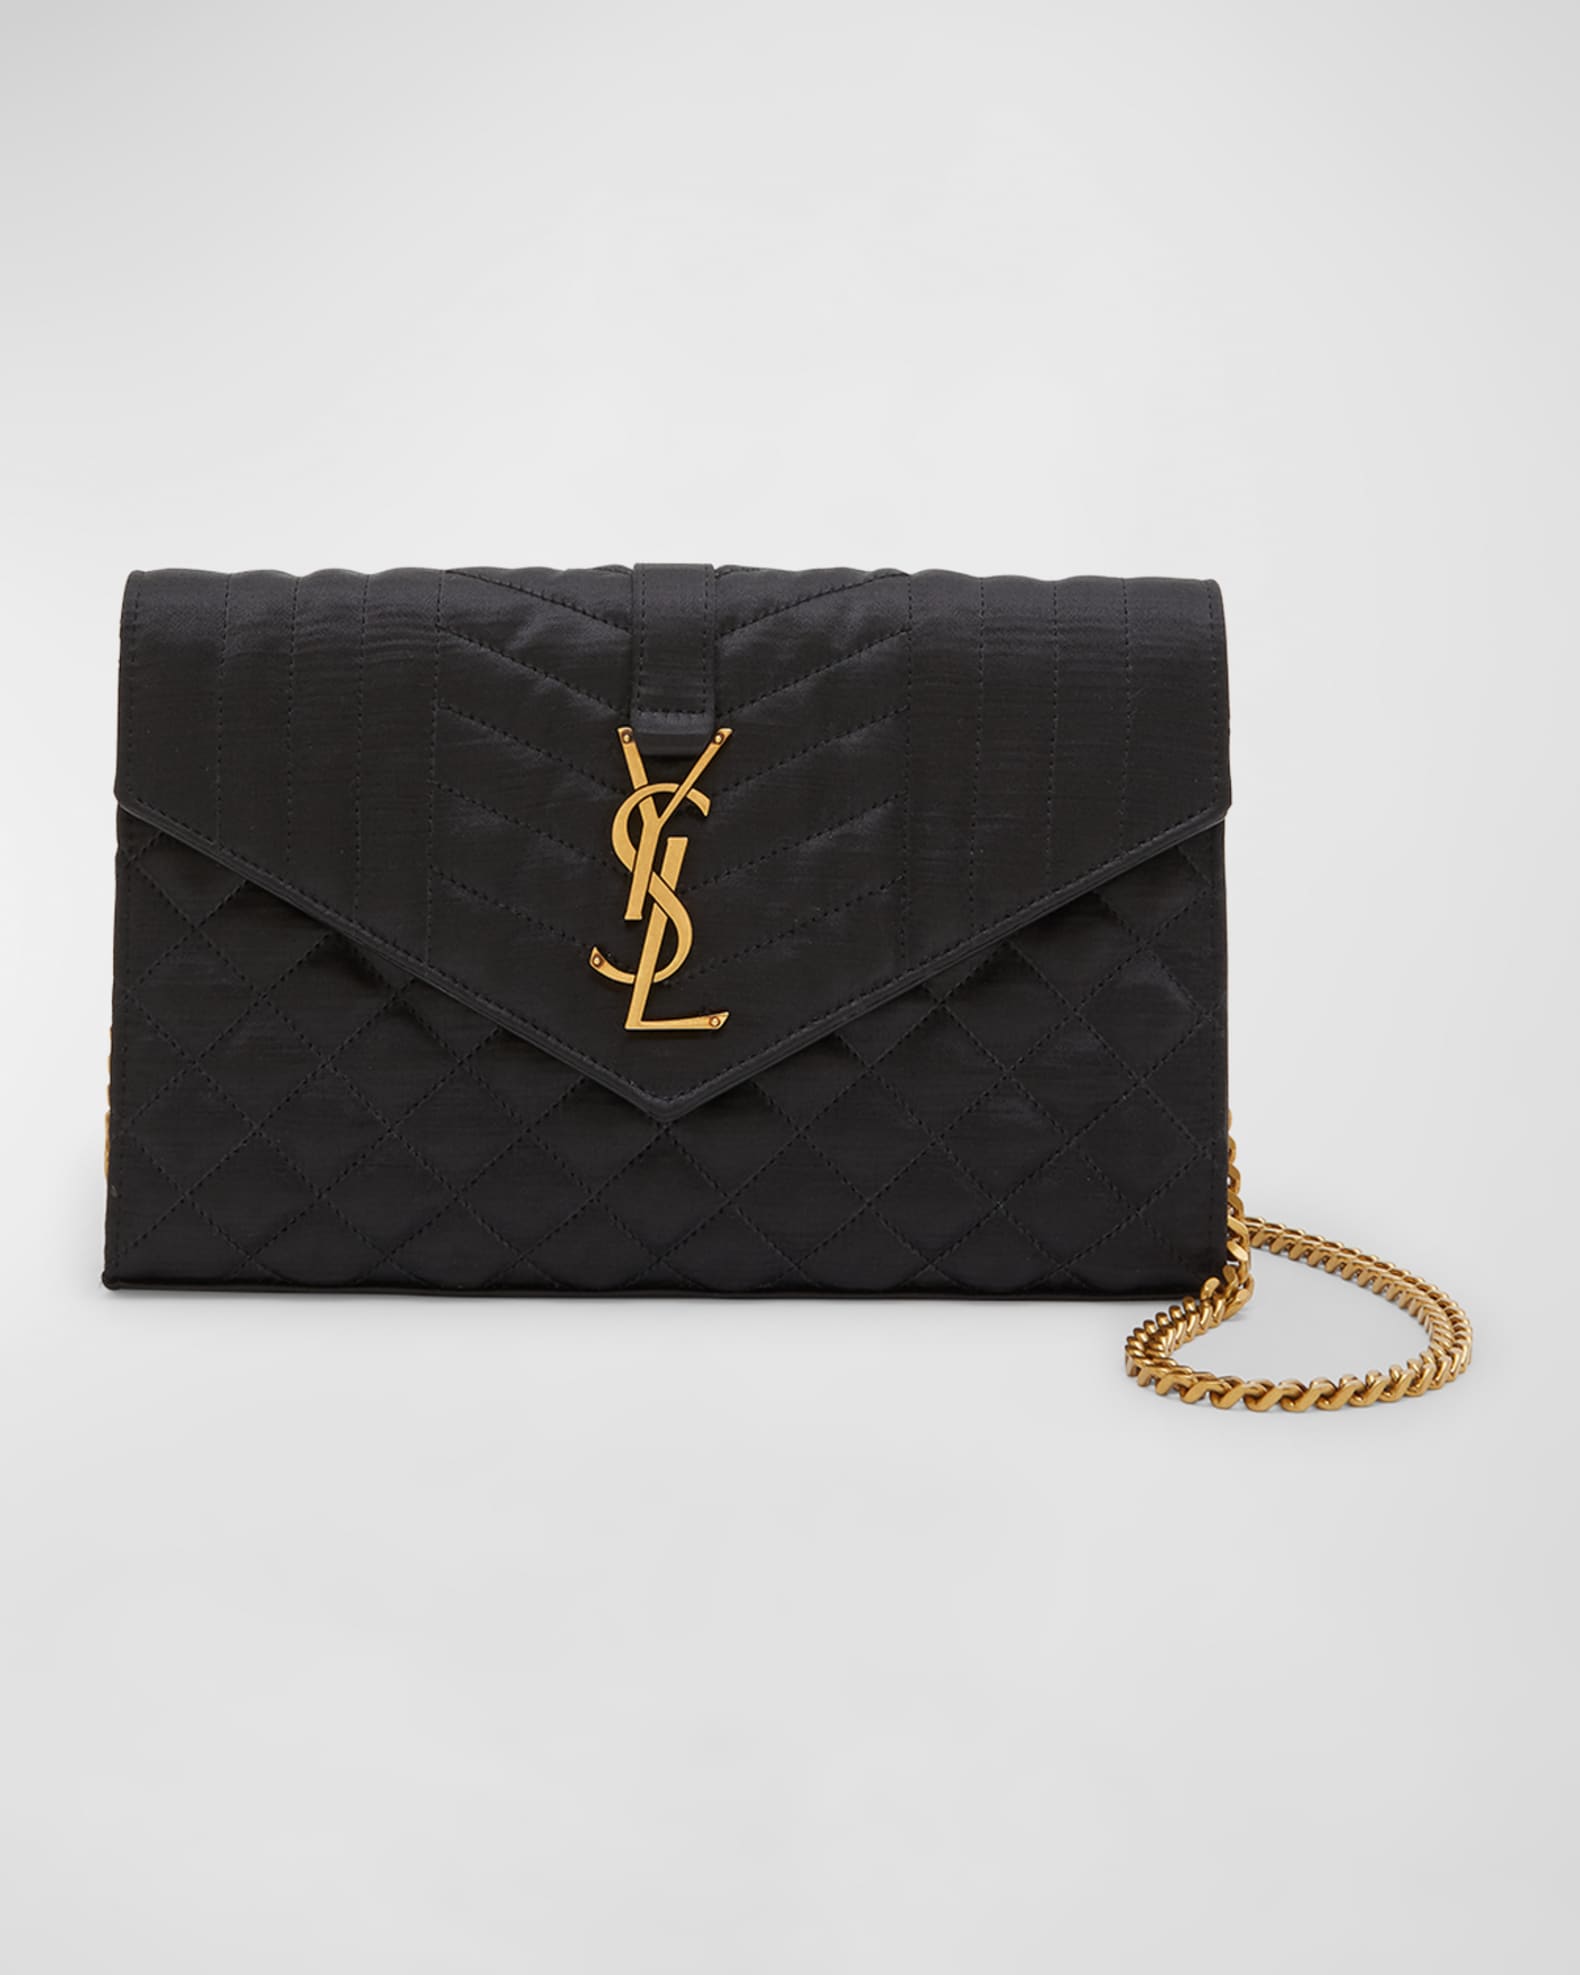 Saint Laurent Ysl Quilted Satin Wallet on Chain Black